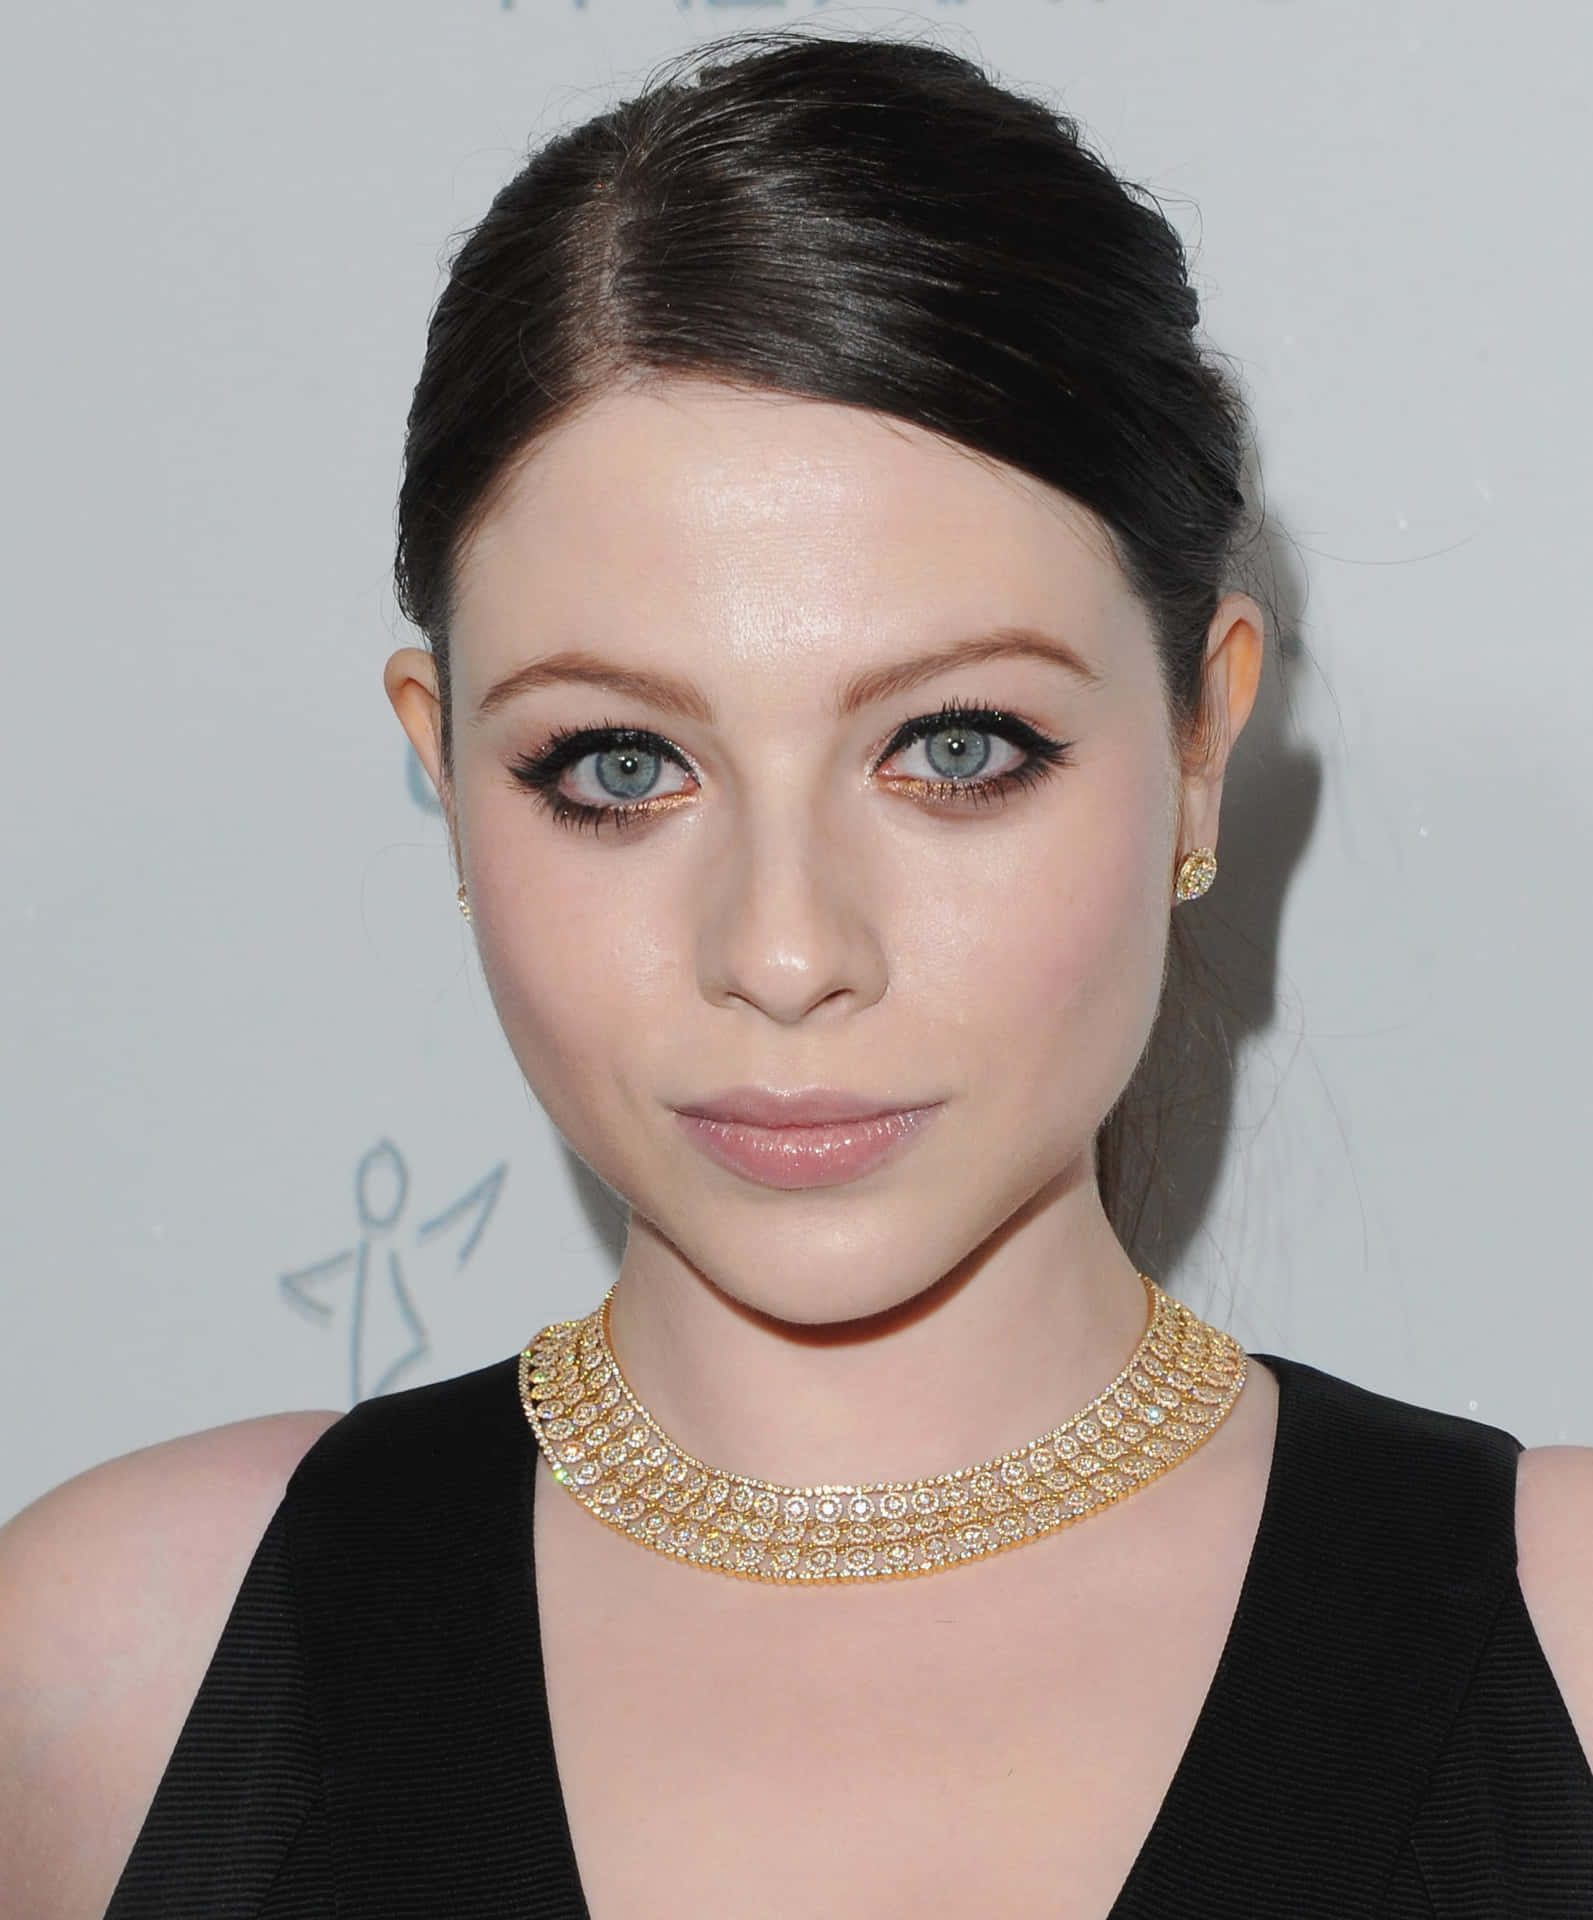 Michelle Trachtenberg Striking A Pose In A Stylish Outfit Background